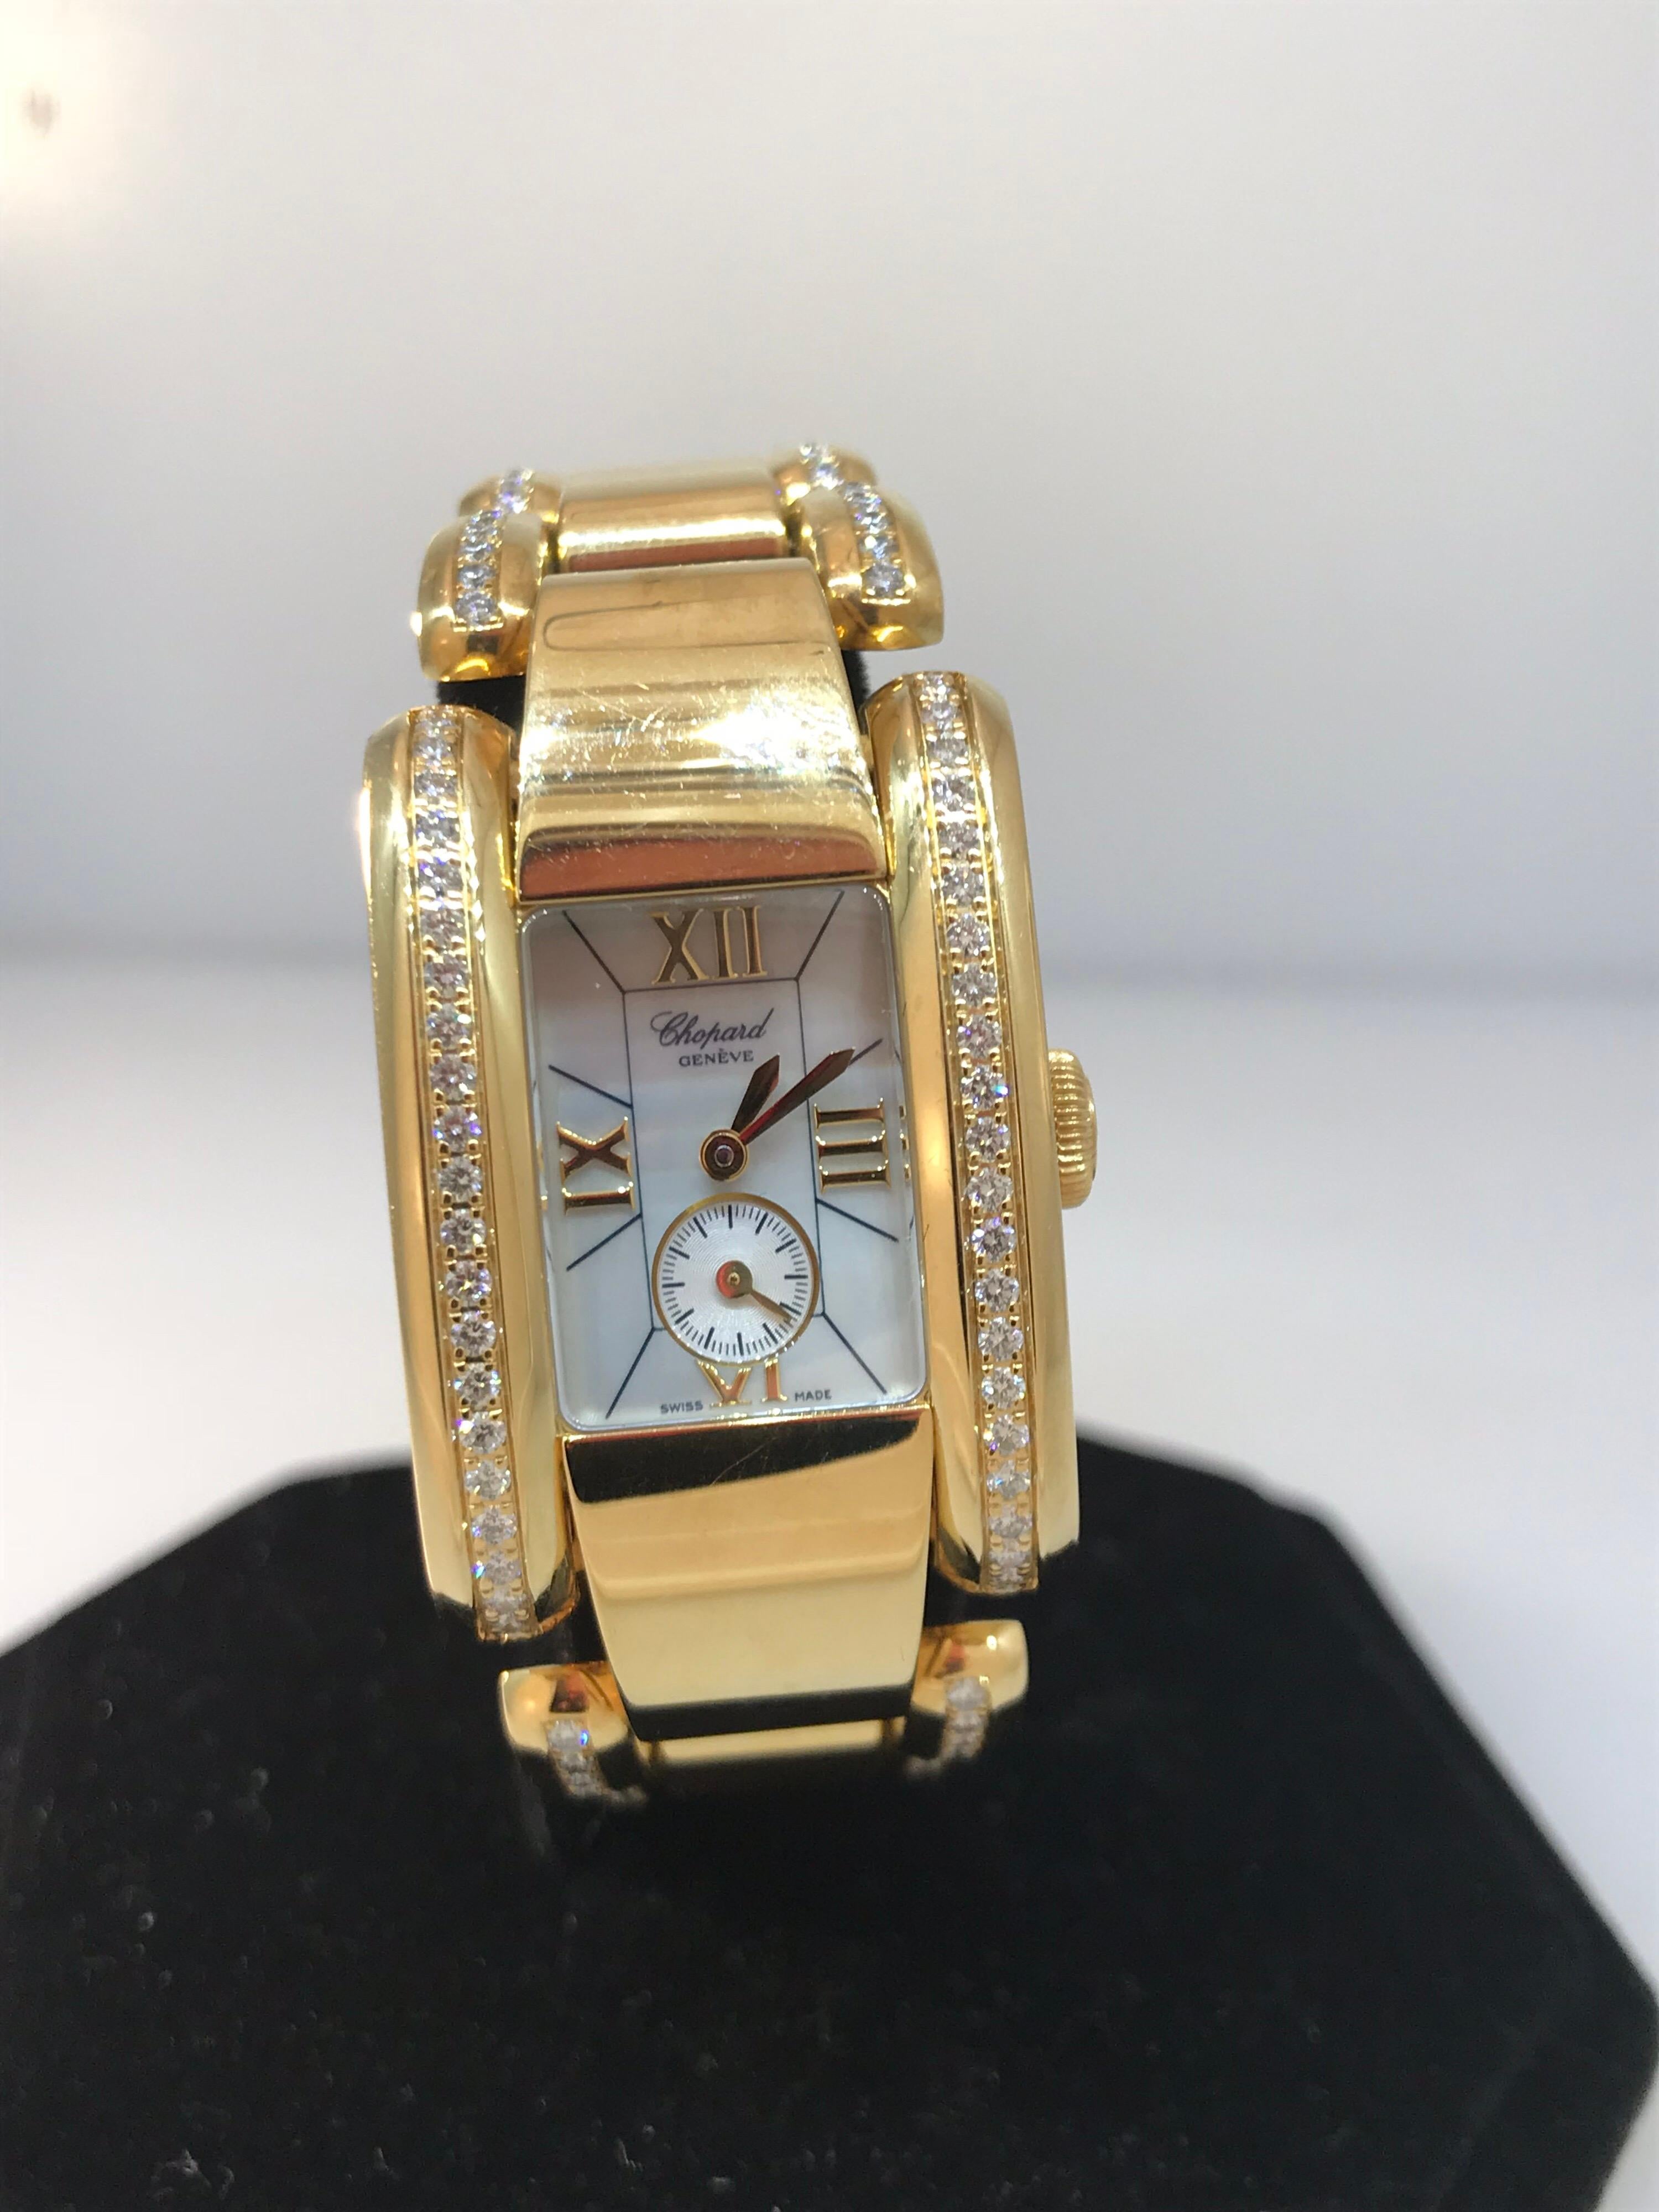 Chopard La Strada Yellow Gold & Diamond Ladies Watch

Model Number: 41/6916-0001

100% Authentic

New 

Comes with original Chopard Box, Certificate of Authenticity and Warranty, and Instruction Manual

18 Karat Yellow Gold Case & Bracelet

White